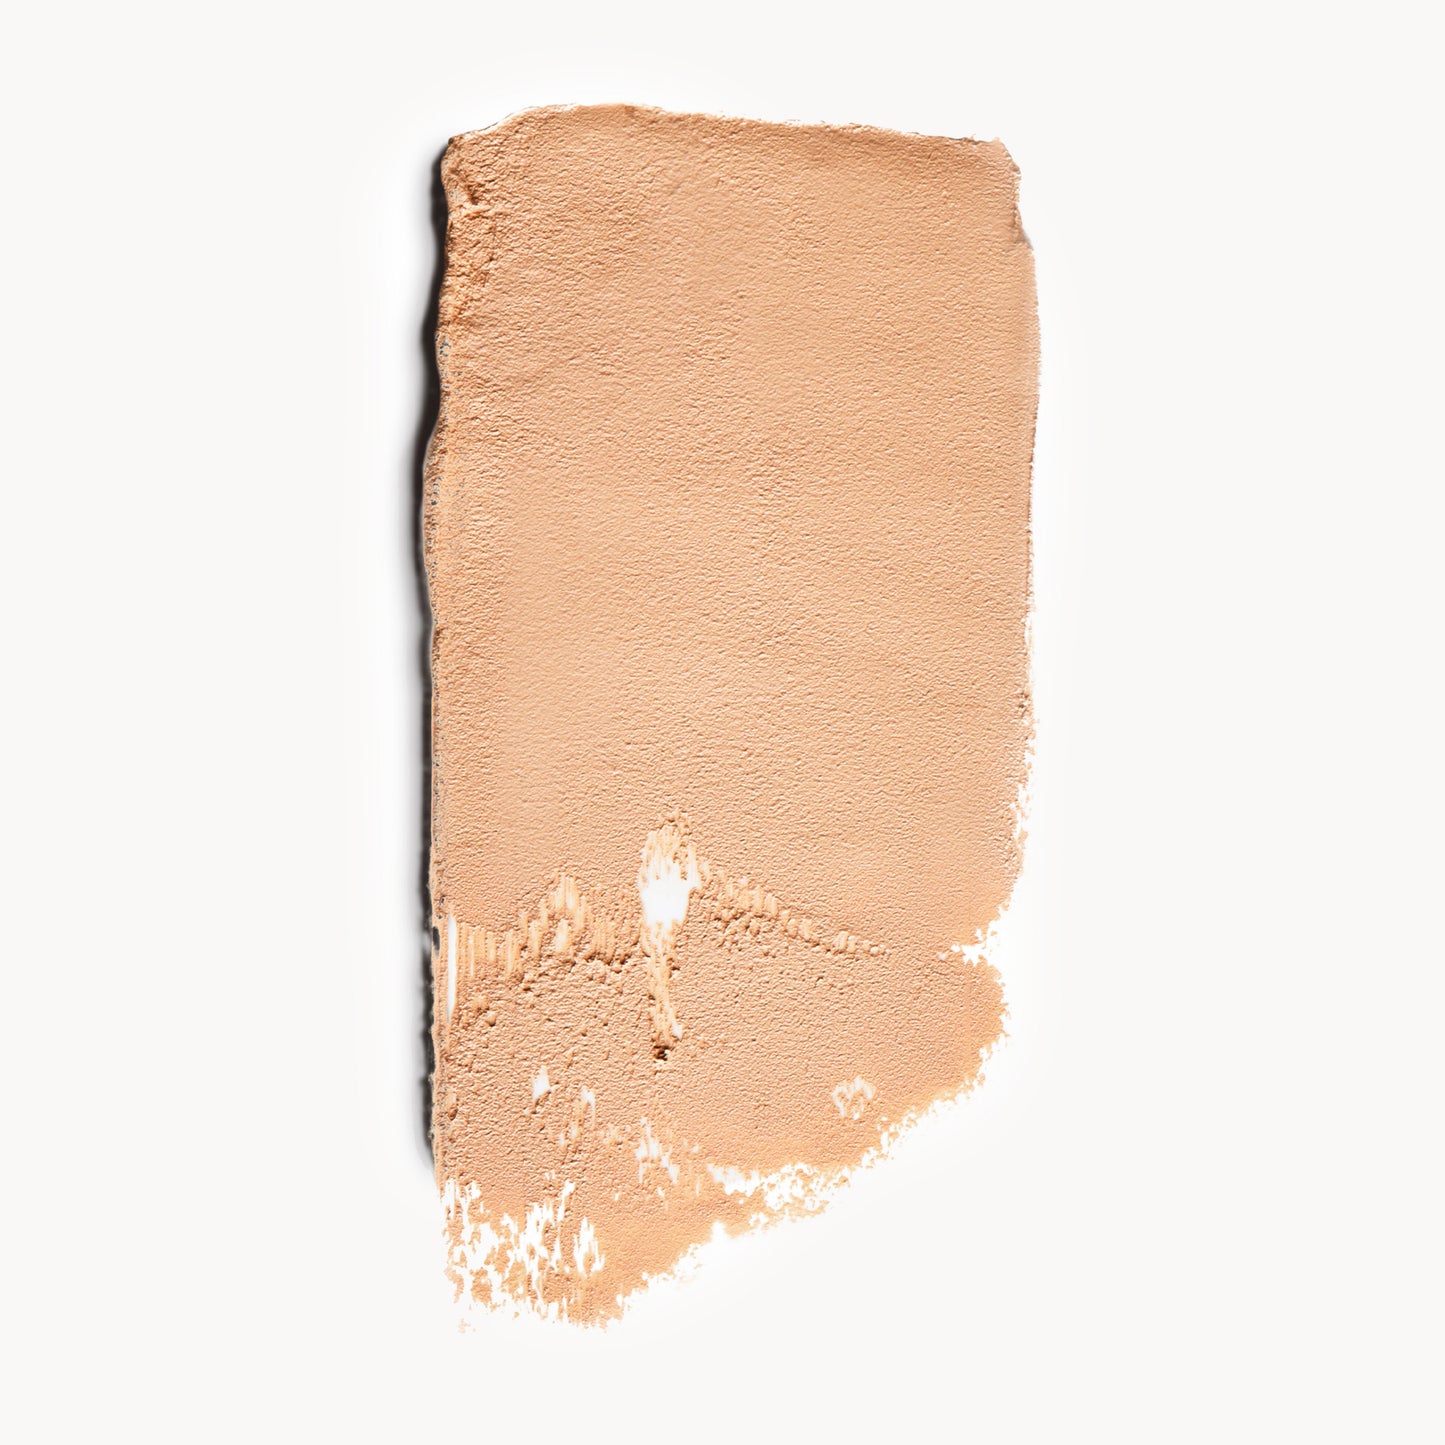 A wipe of light, neutral-toned cream foundation on a white background